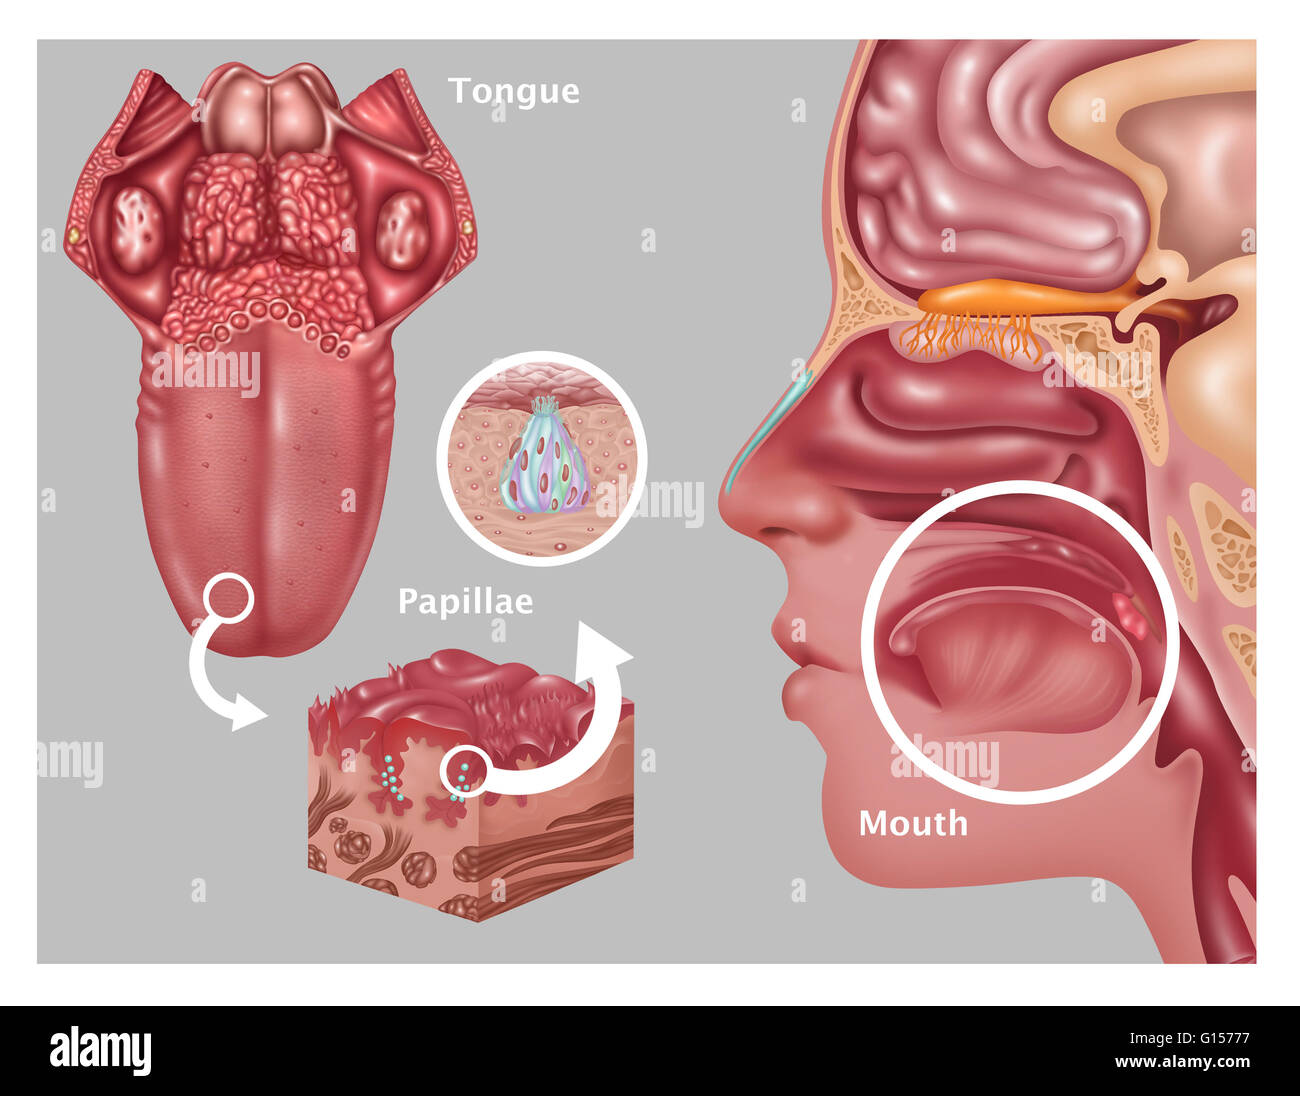 Illustration depicting the anatomy of taste. At left is an image of the tongue highlighting the papillae. Inset near the middle are a detailed close ups of papillae (bottom inset) and the structure of a taste bud (top inset). The human profile at right sh Stock Photo